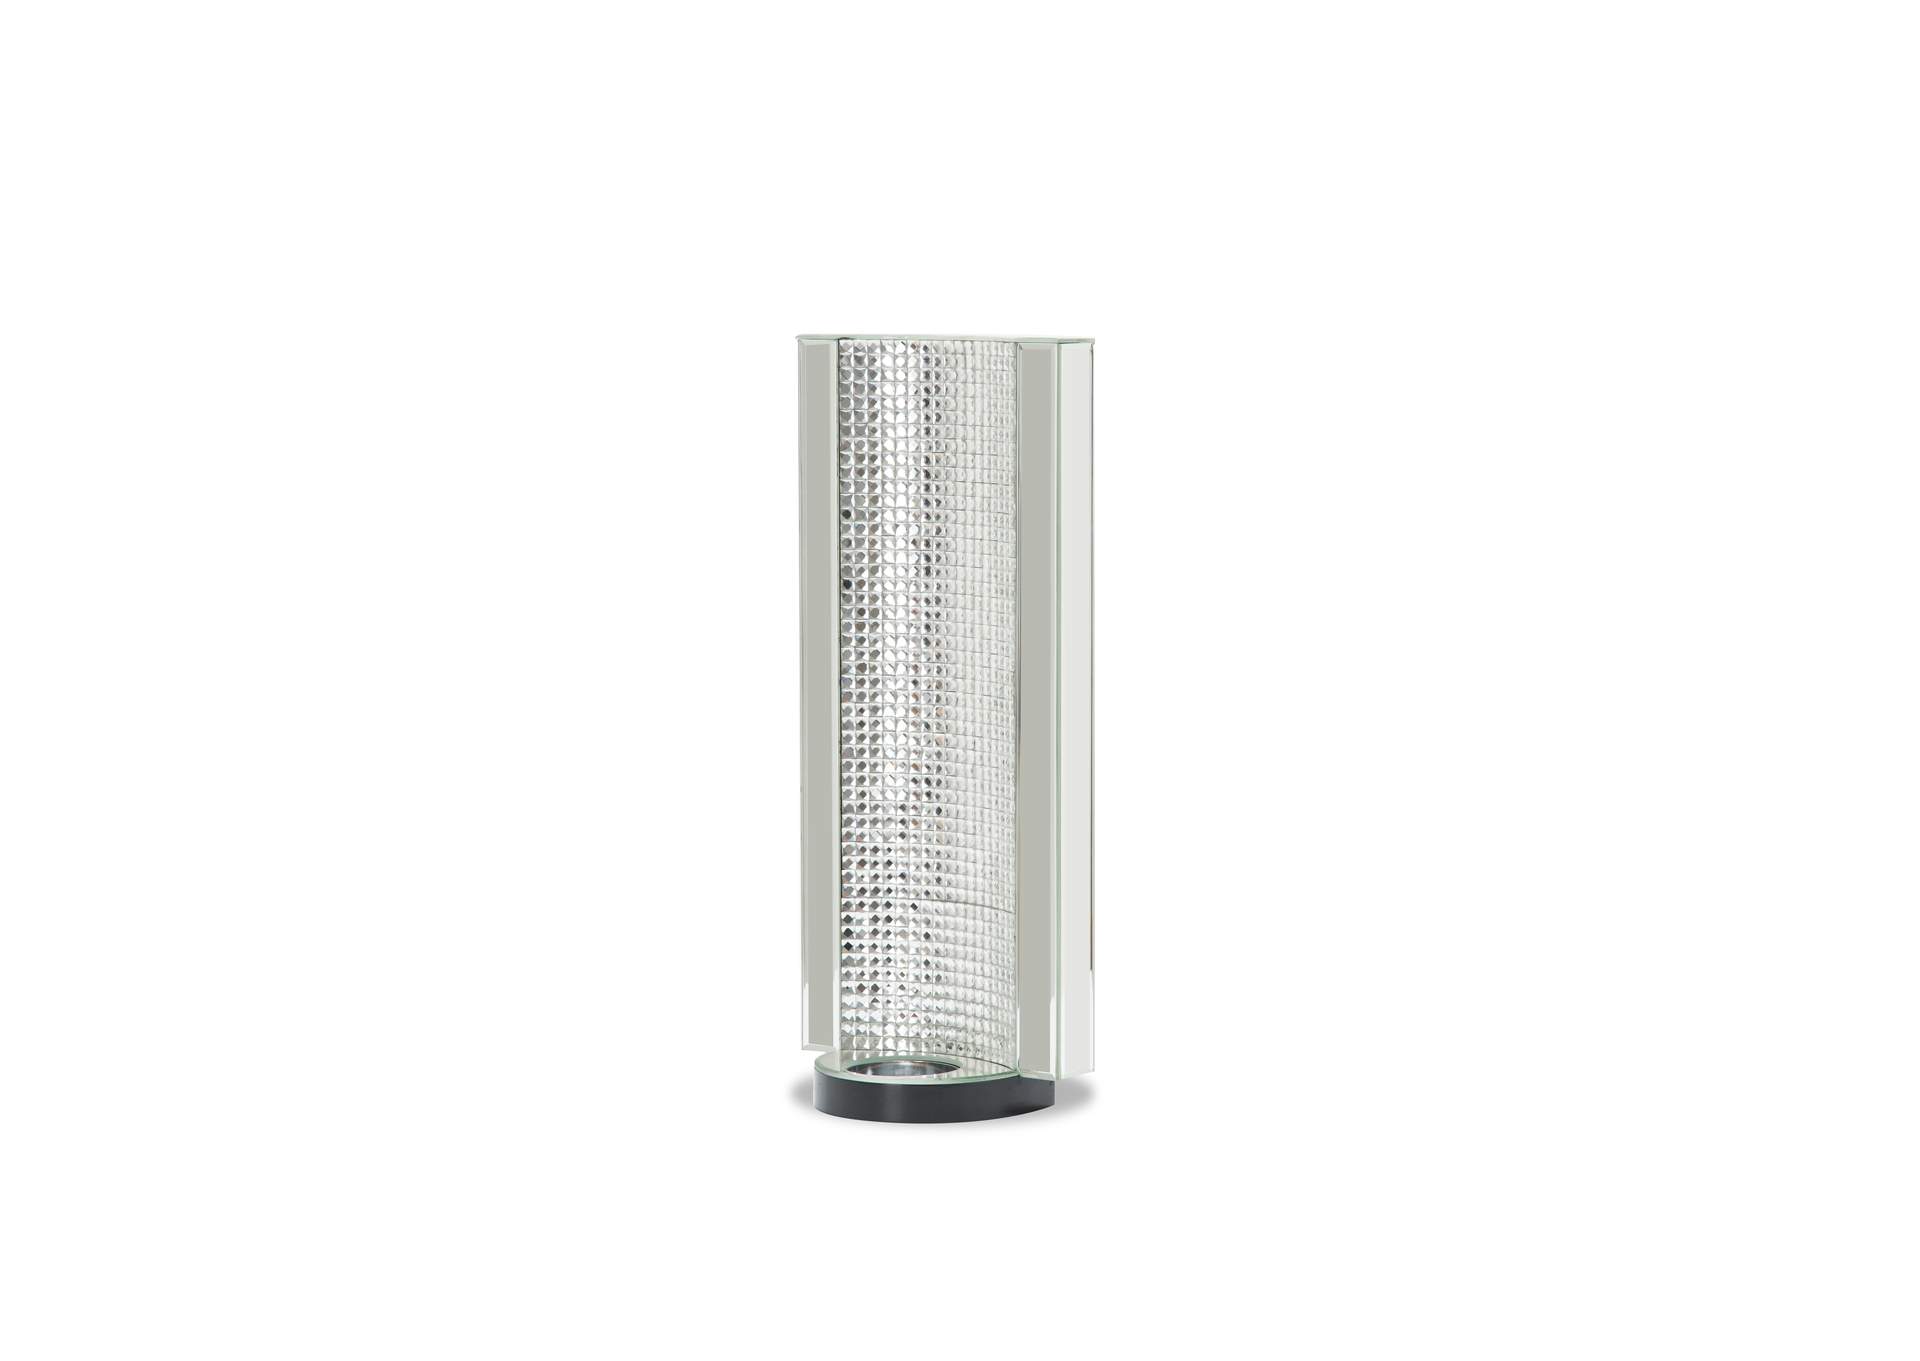 Montreal Mirrored Candle Holder,AICO